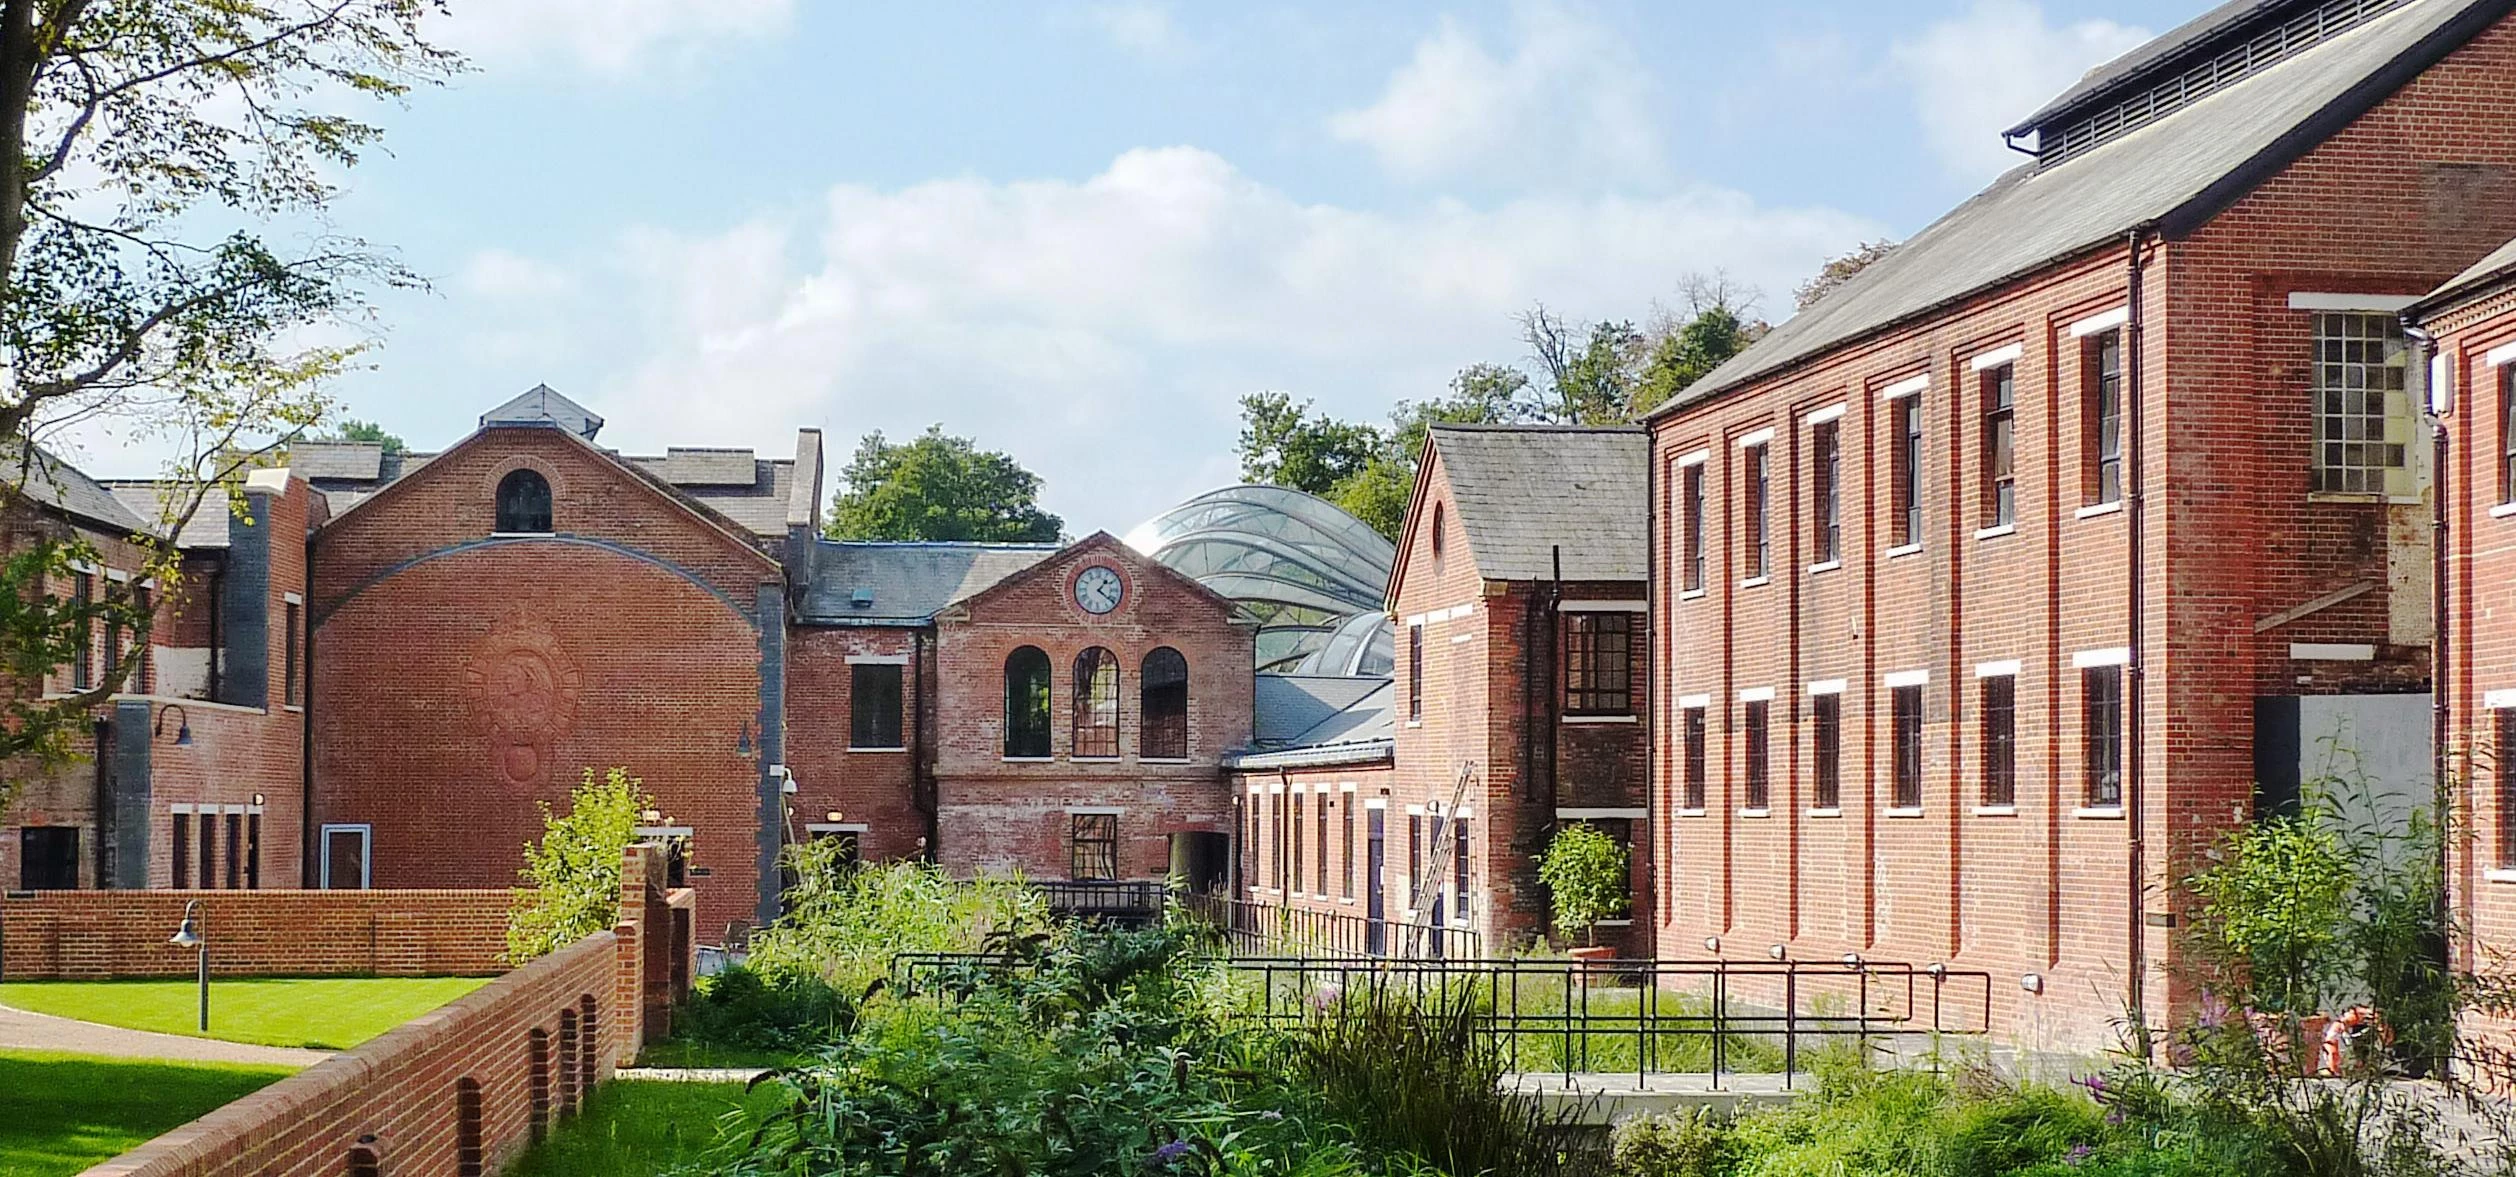 Bombay Sapphire Distillery and Visitor Centre